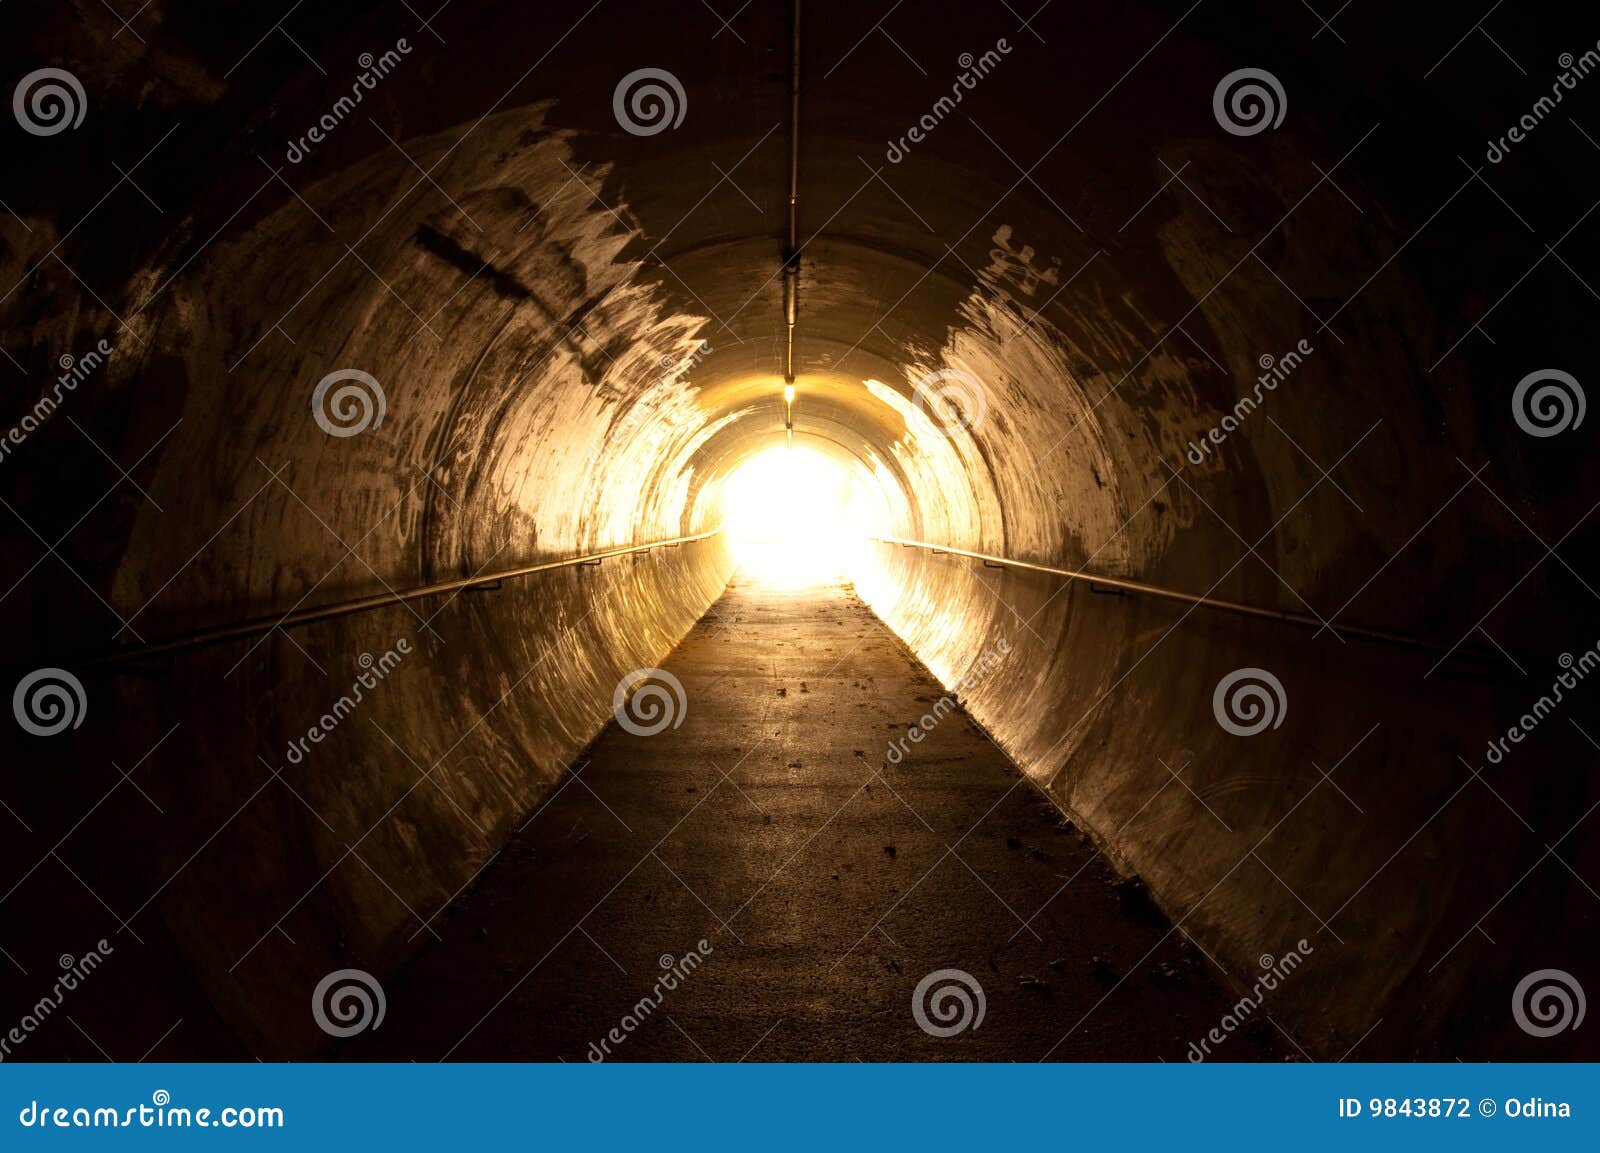 light at the end of the tunnel